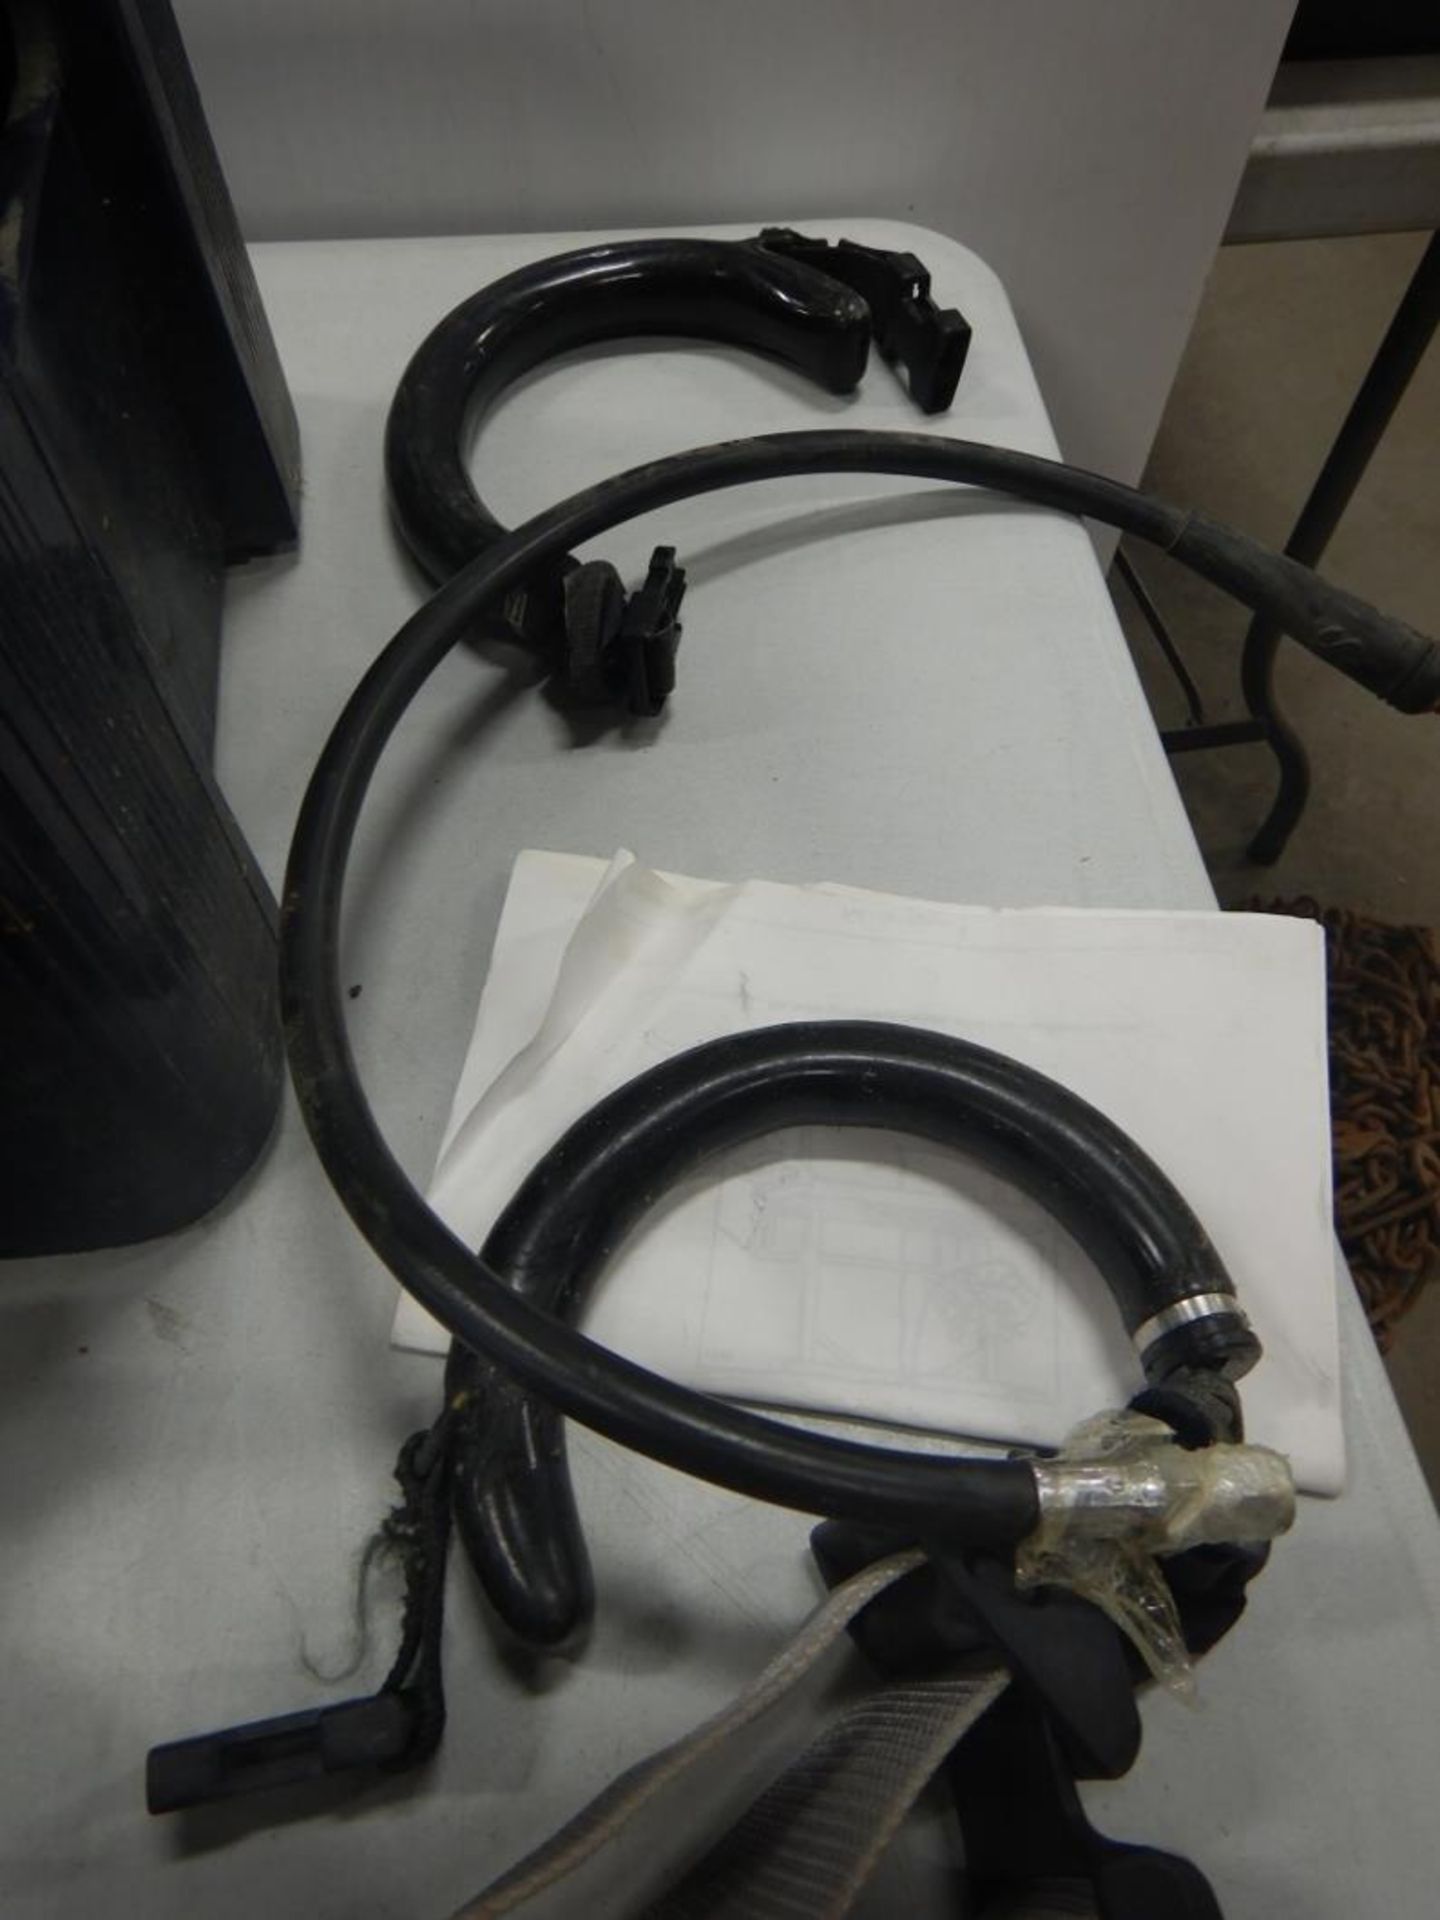 L/O ASSORTED DIVING WEIGHTS AND AIR HOSE - Image 4 of 6